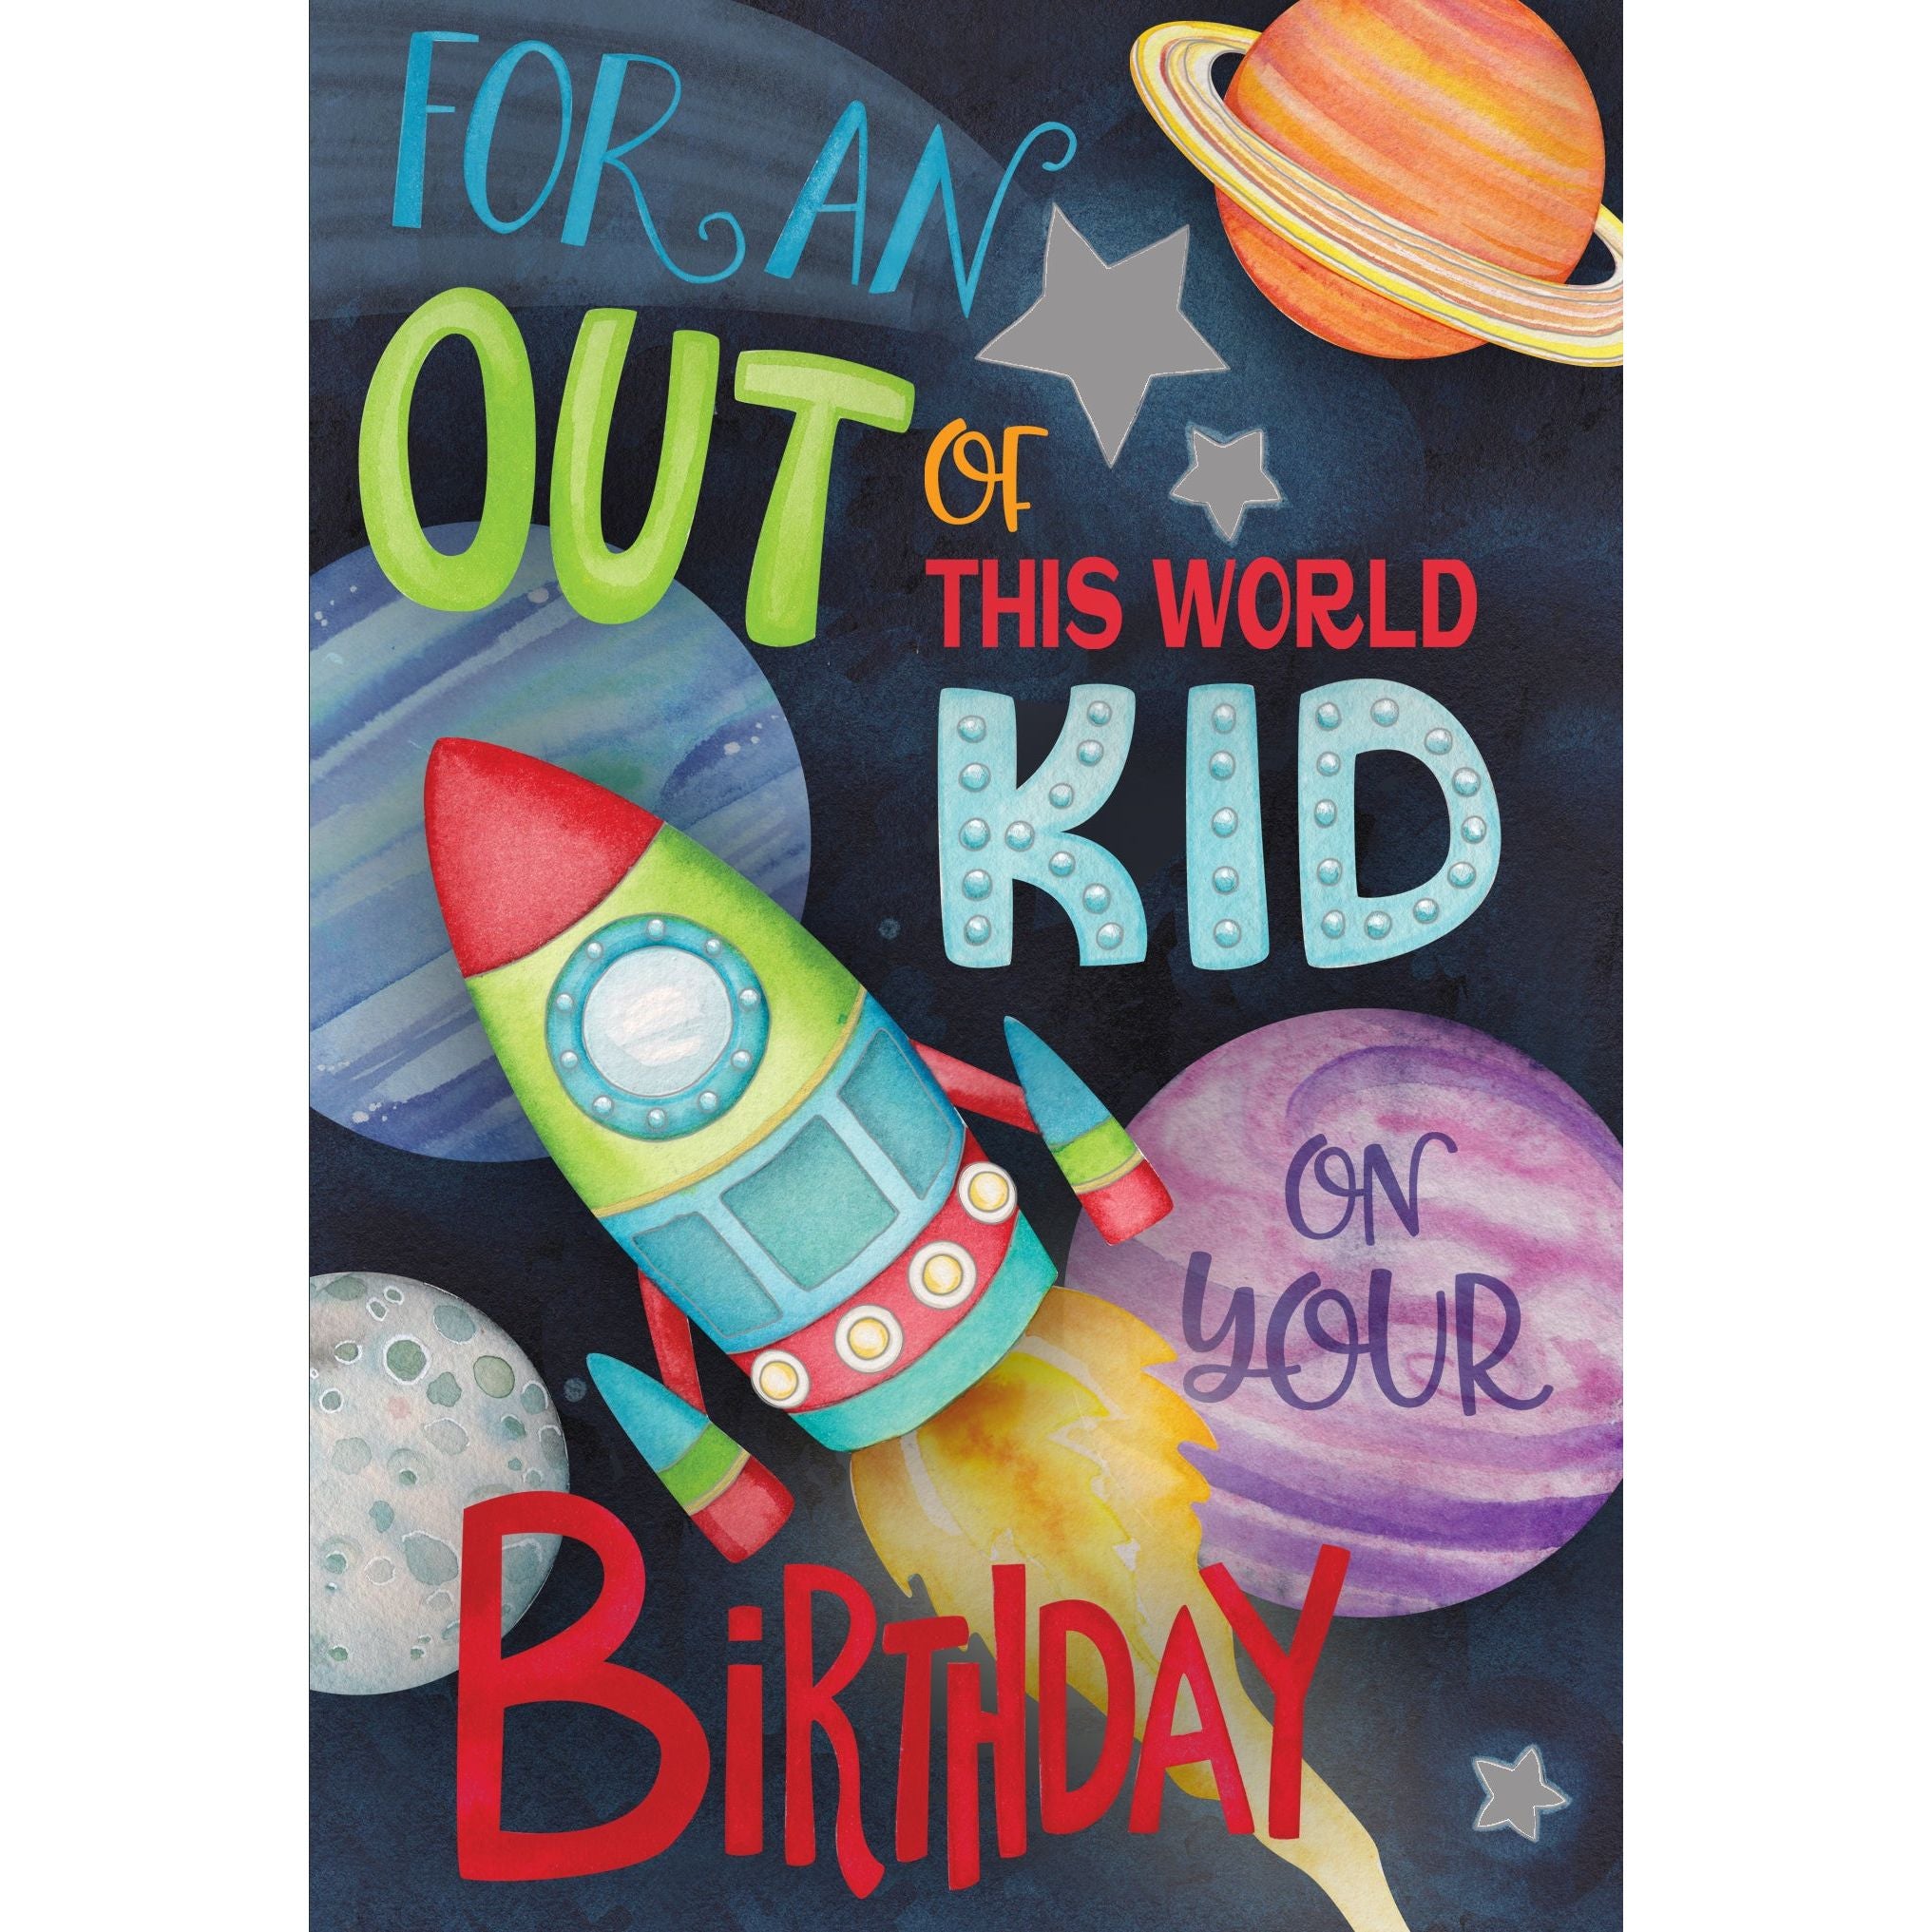 Birthday Card Out of this world - Cardmore